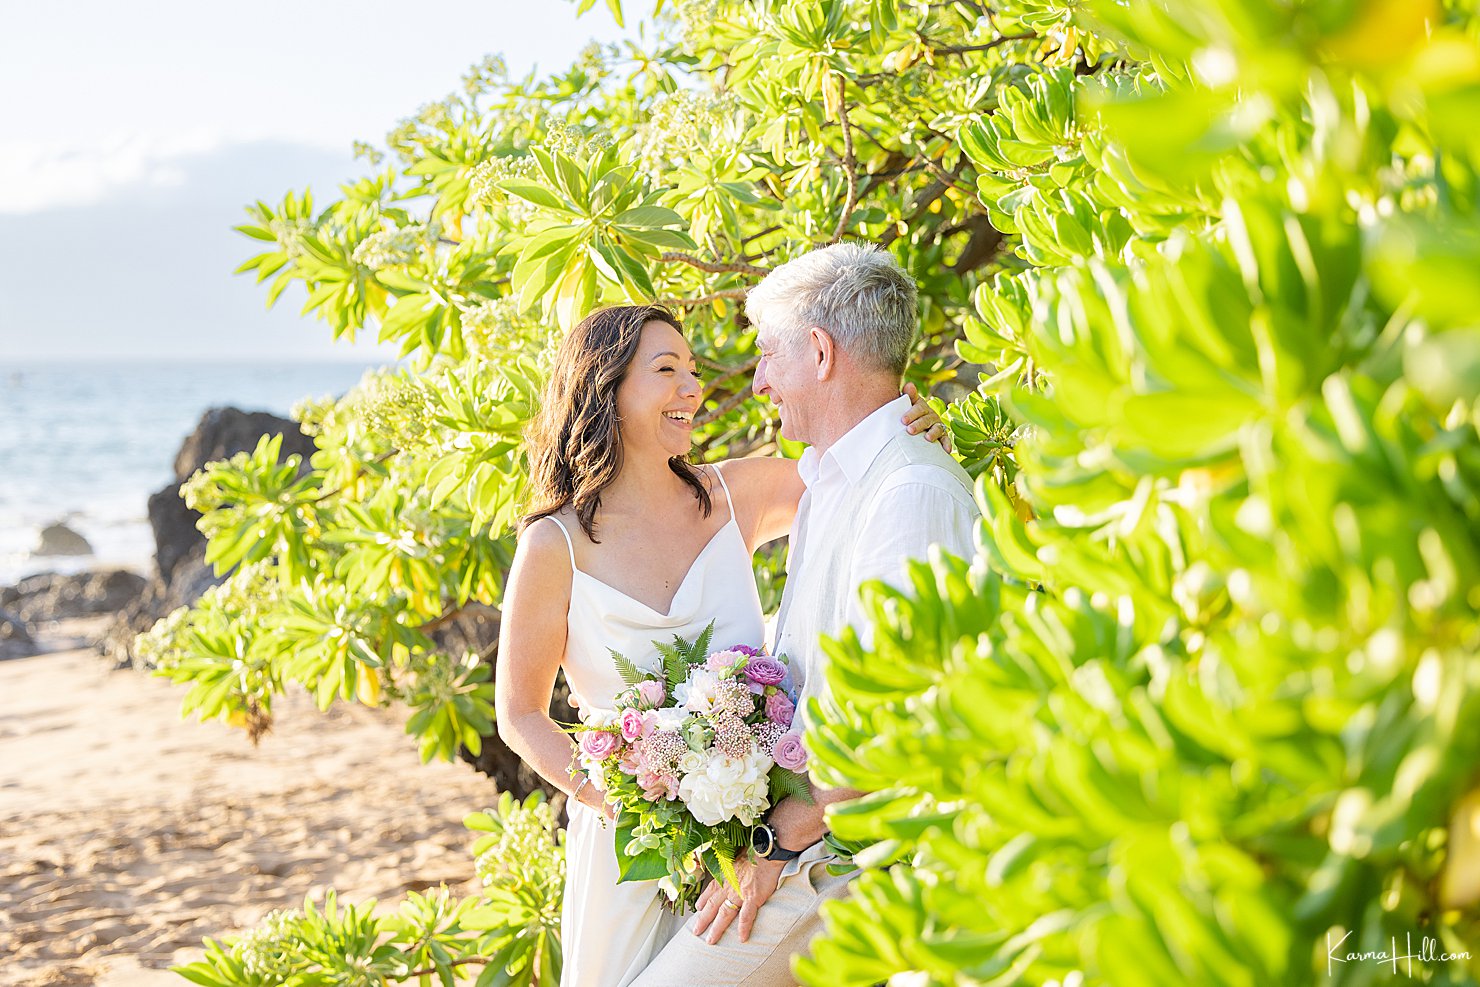 Get married in Maui with Simple Maui Wedding